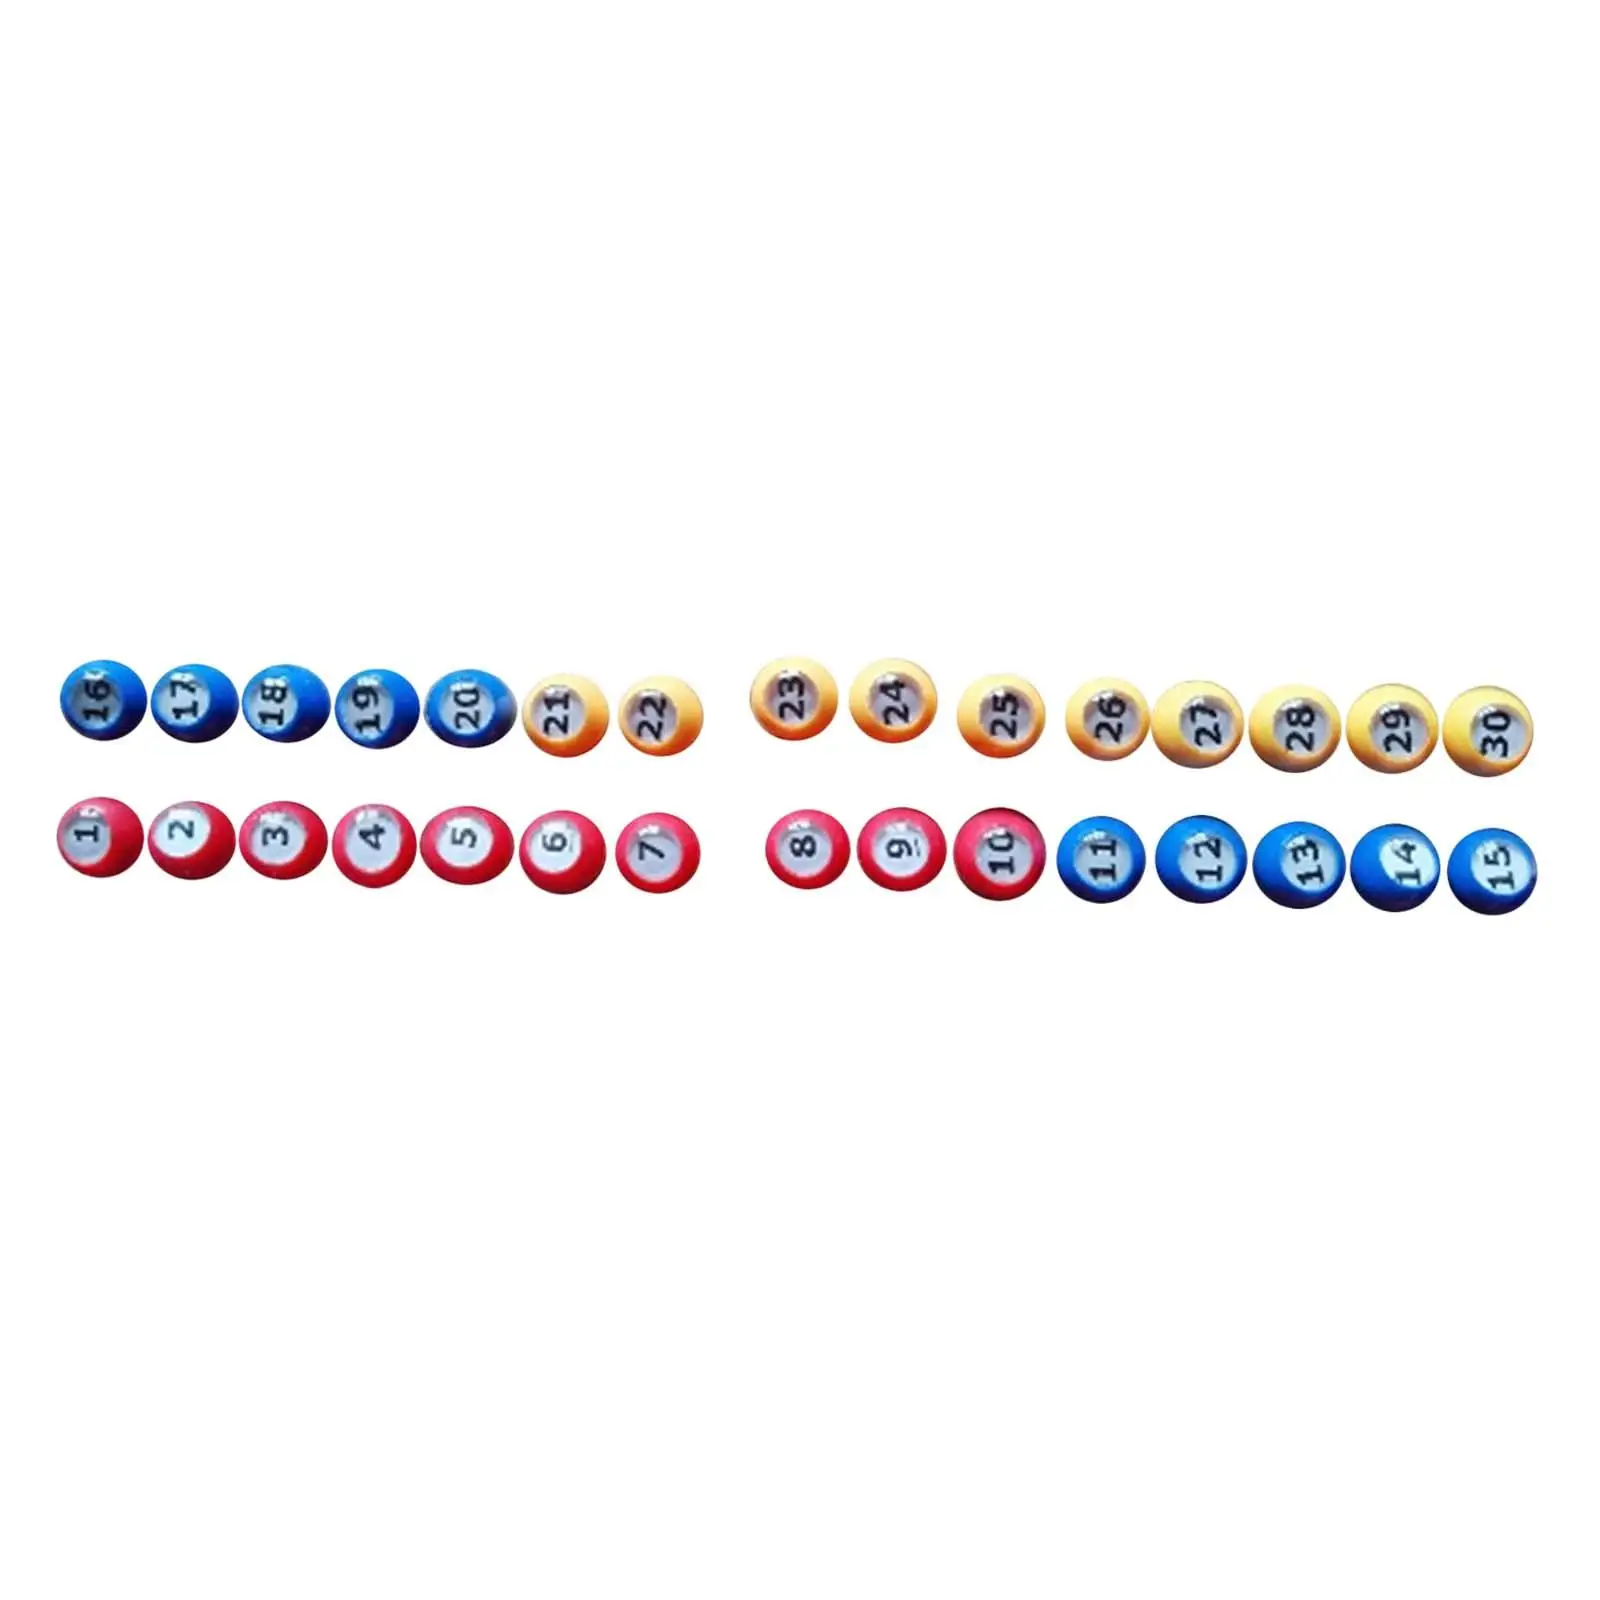 30 Pieces Bingo Ball Fitments Replacement Parts Universal Raffle Balls for